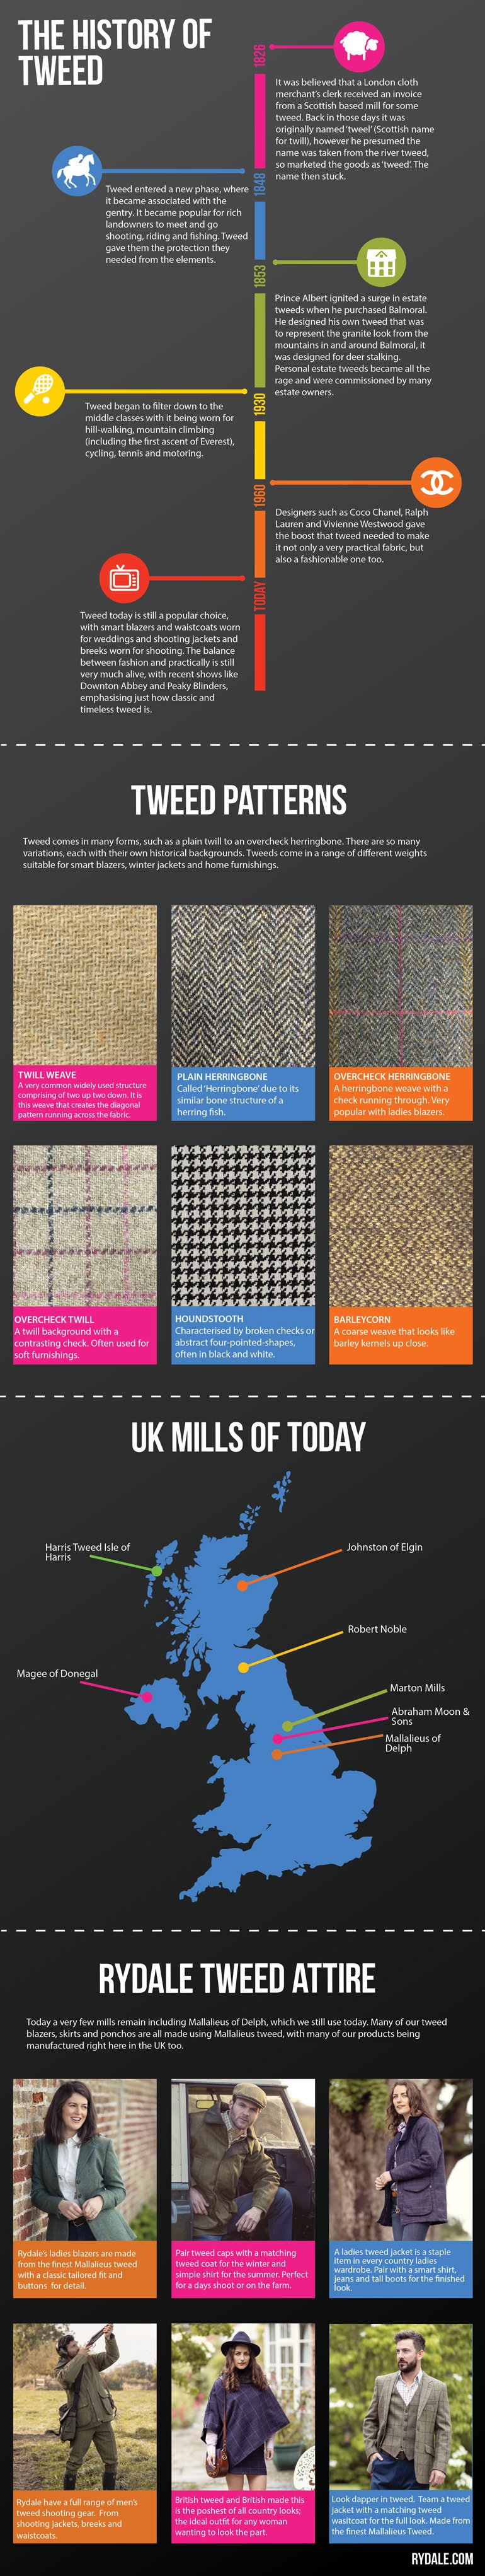 The History of Tweed